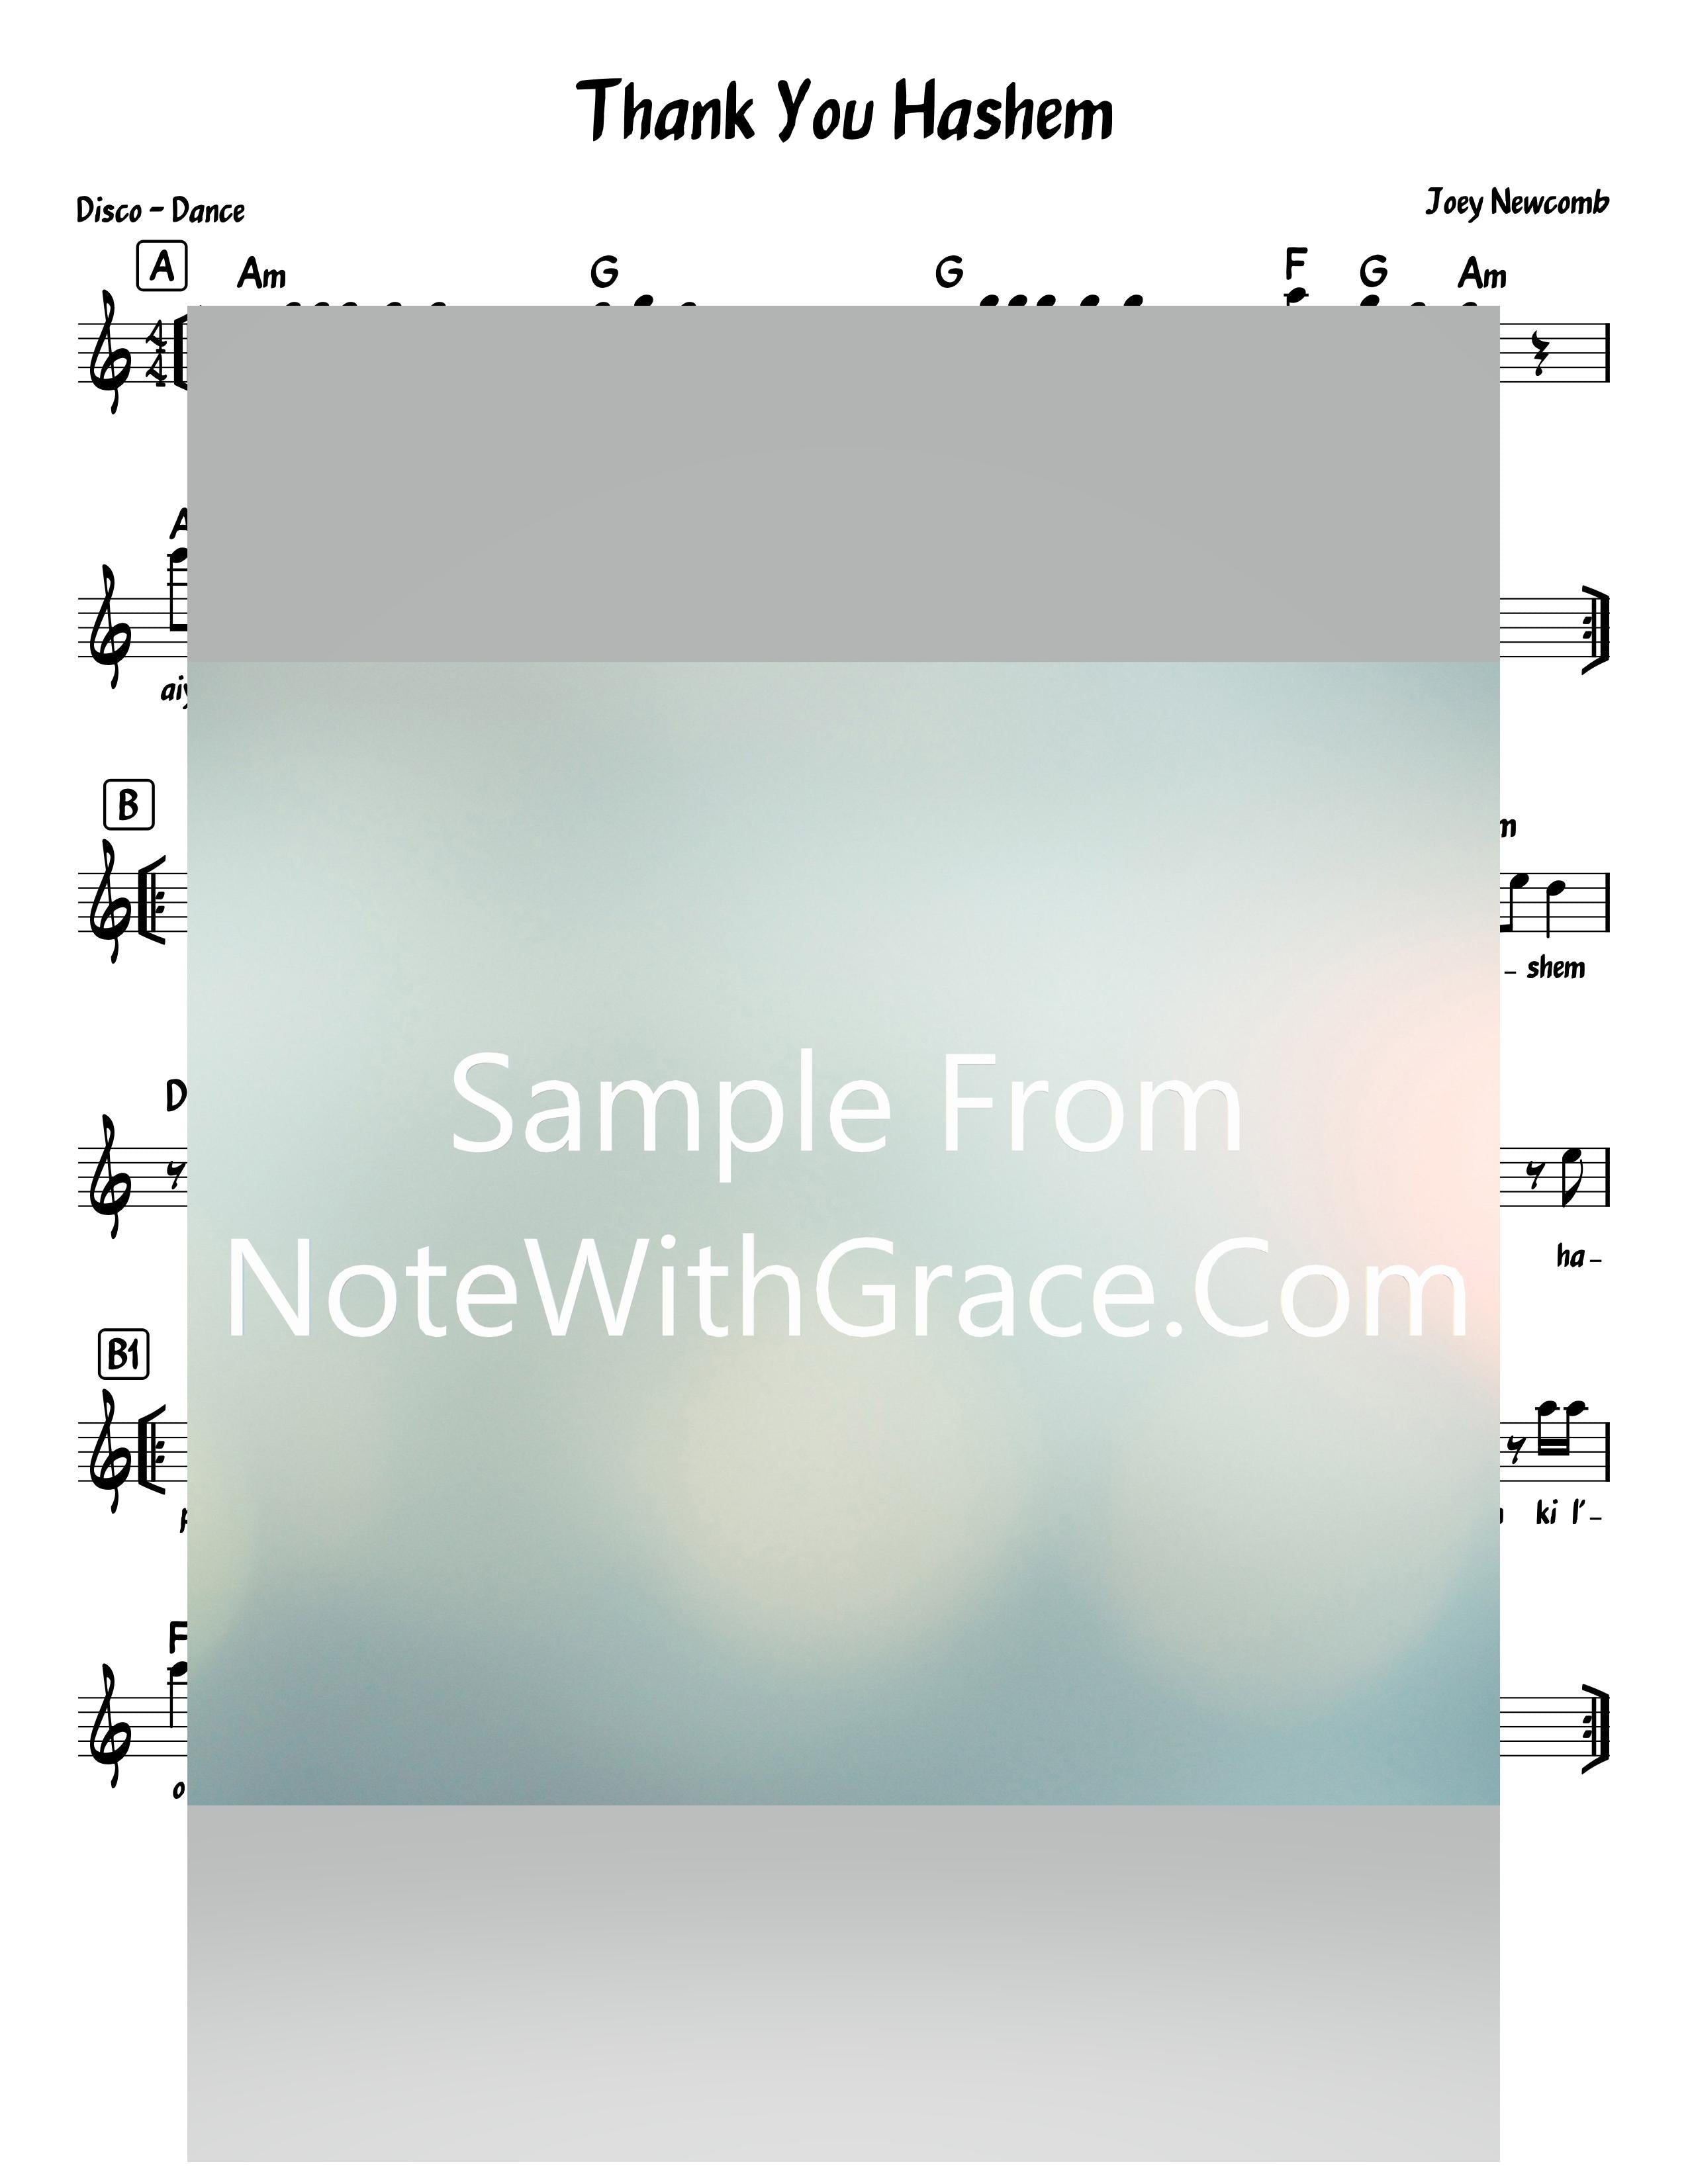 Thank You Hashem Lead Sheet (Joey Newcomb) New Single Video-Sheet music-NoteWithGrace.com